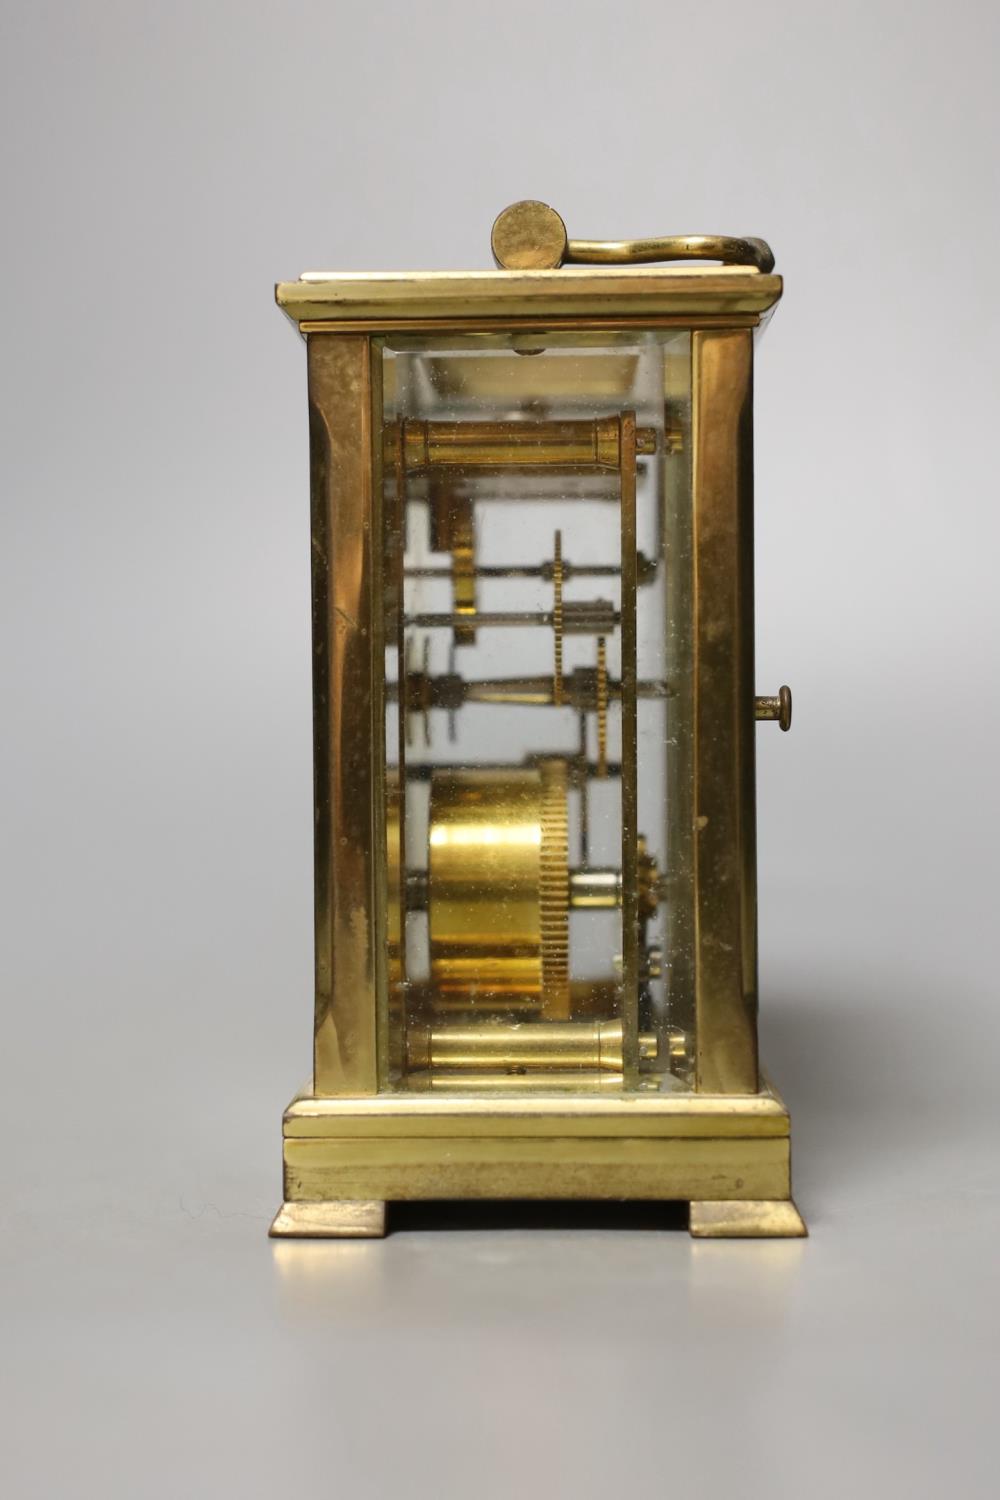 A Dent retailed brass carriage timepiece,12 cms high. - Image 2 of 5